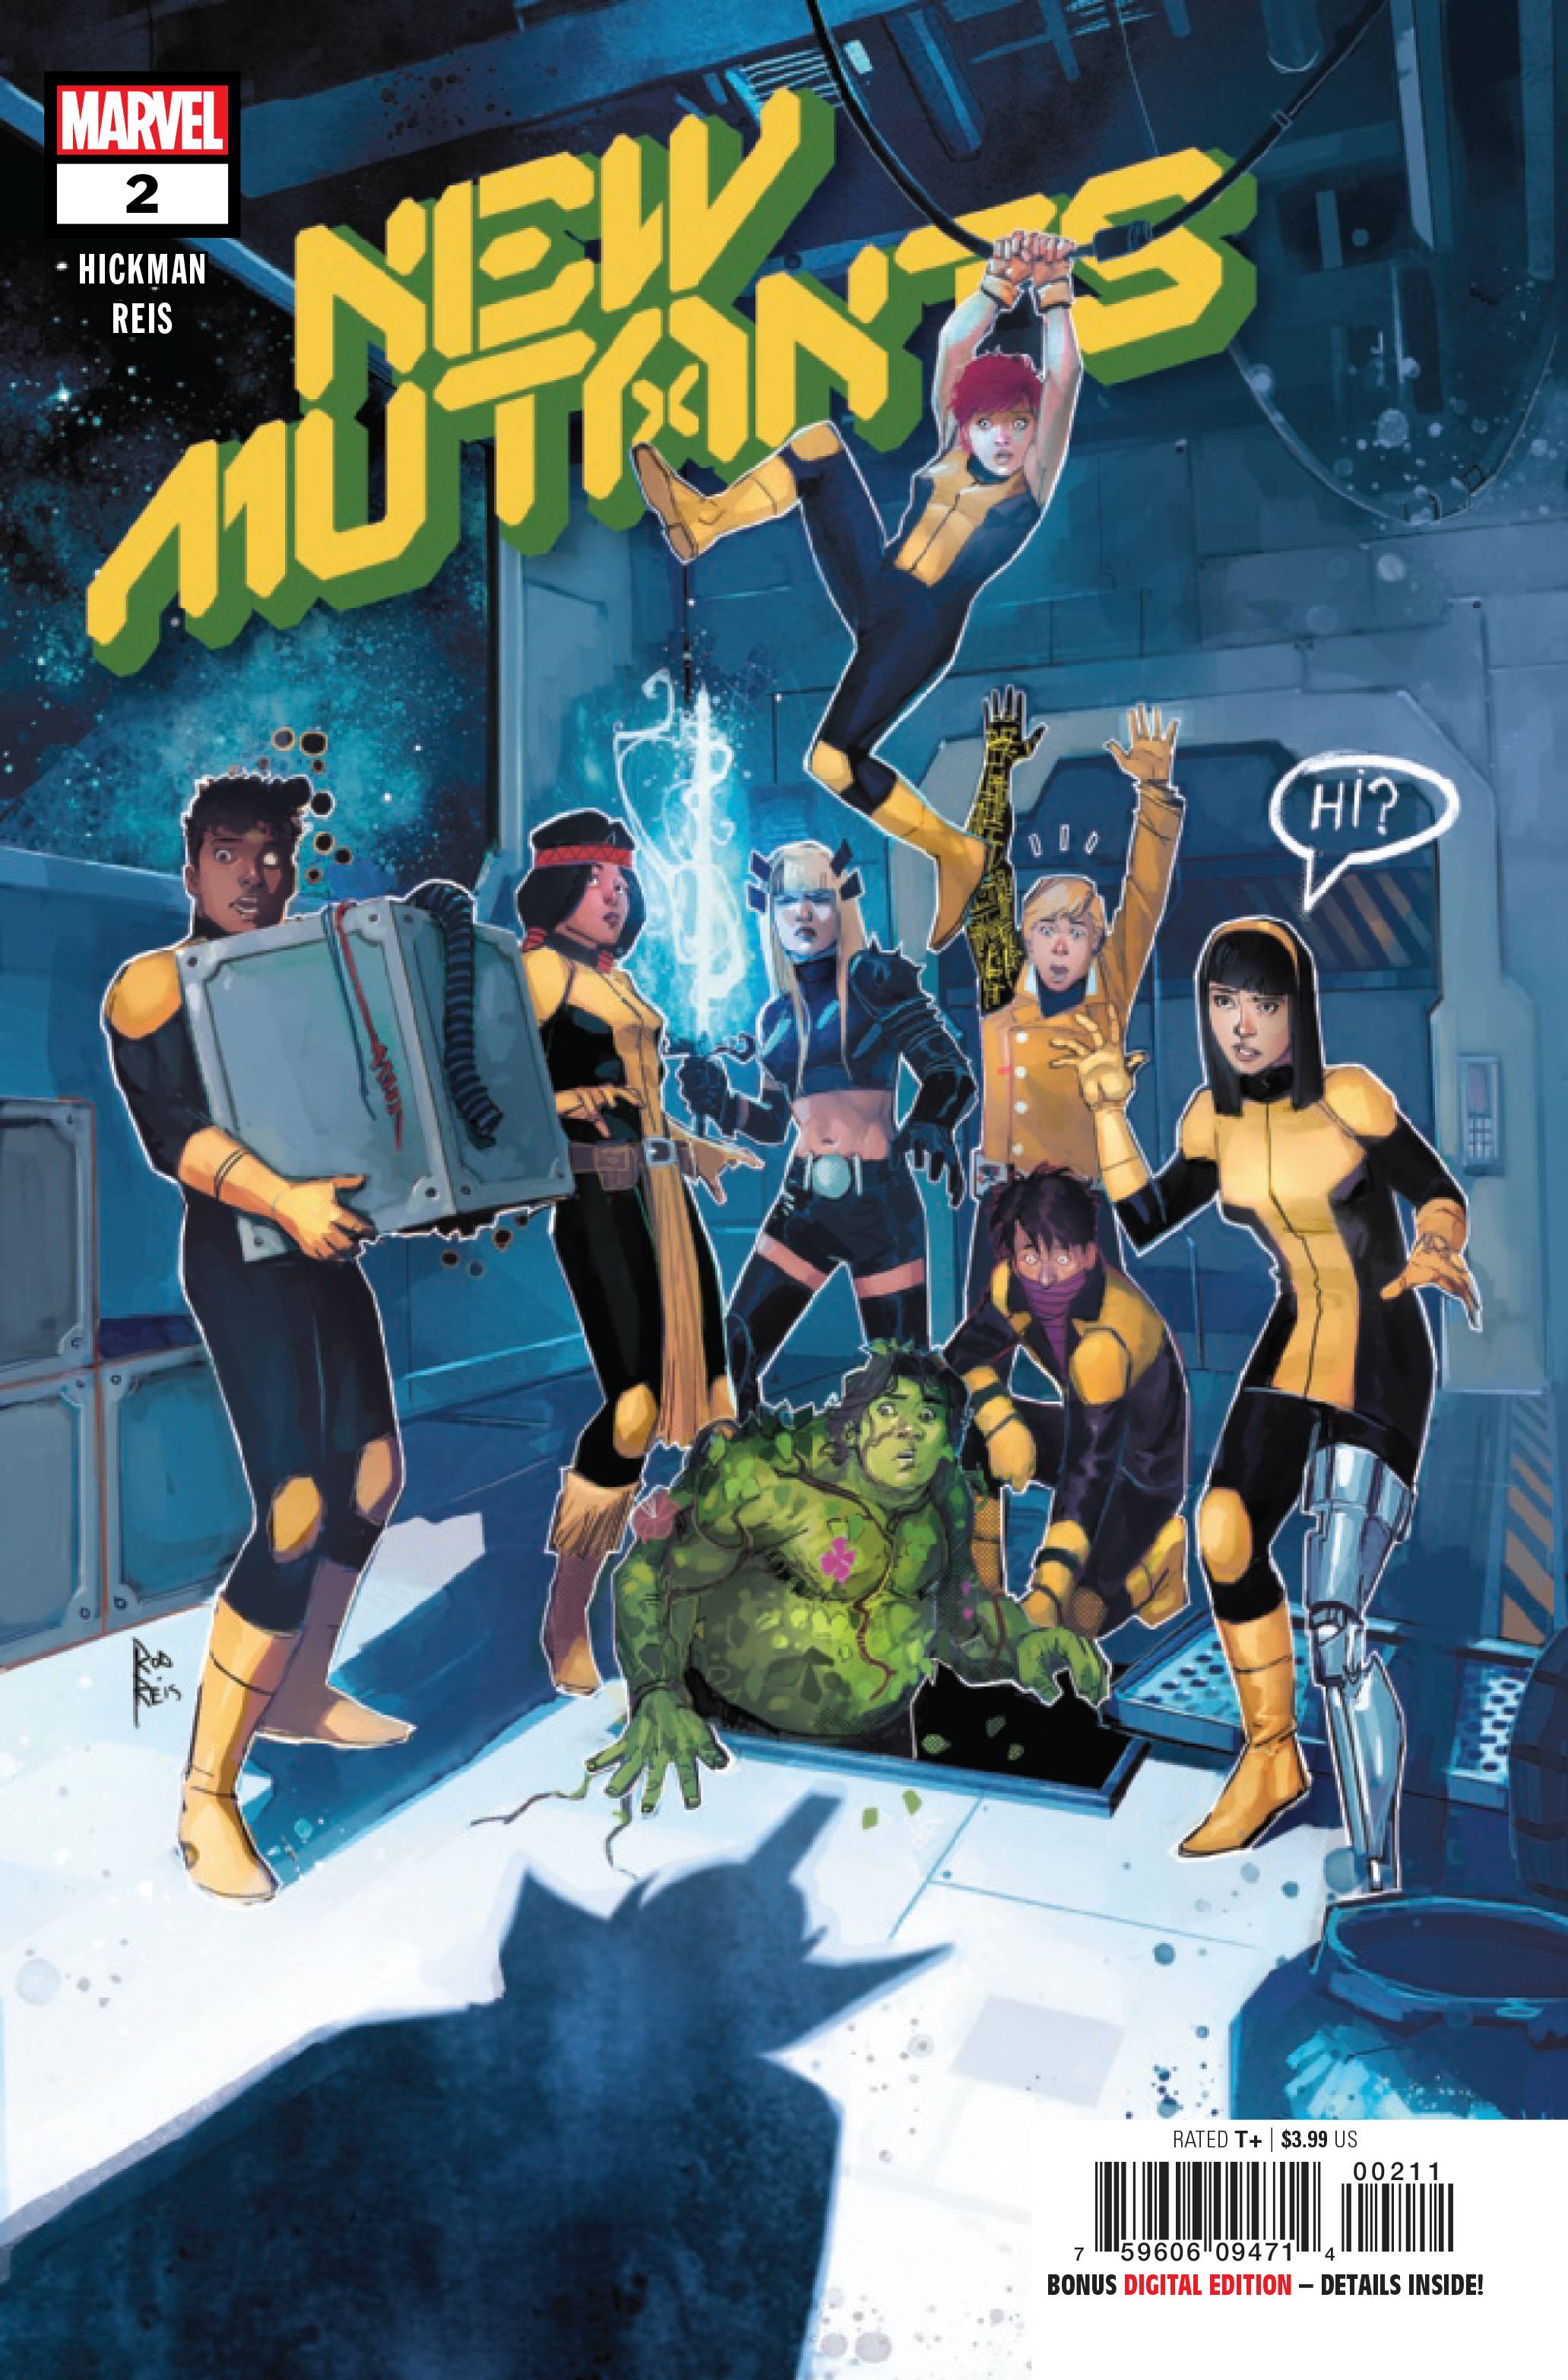 SEP190758 - NEW MUTANTS #2 DX - Free Comic Book Day